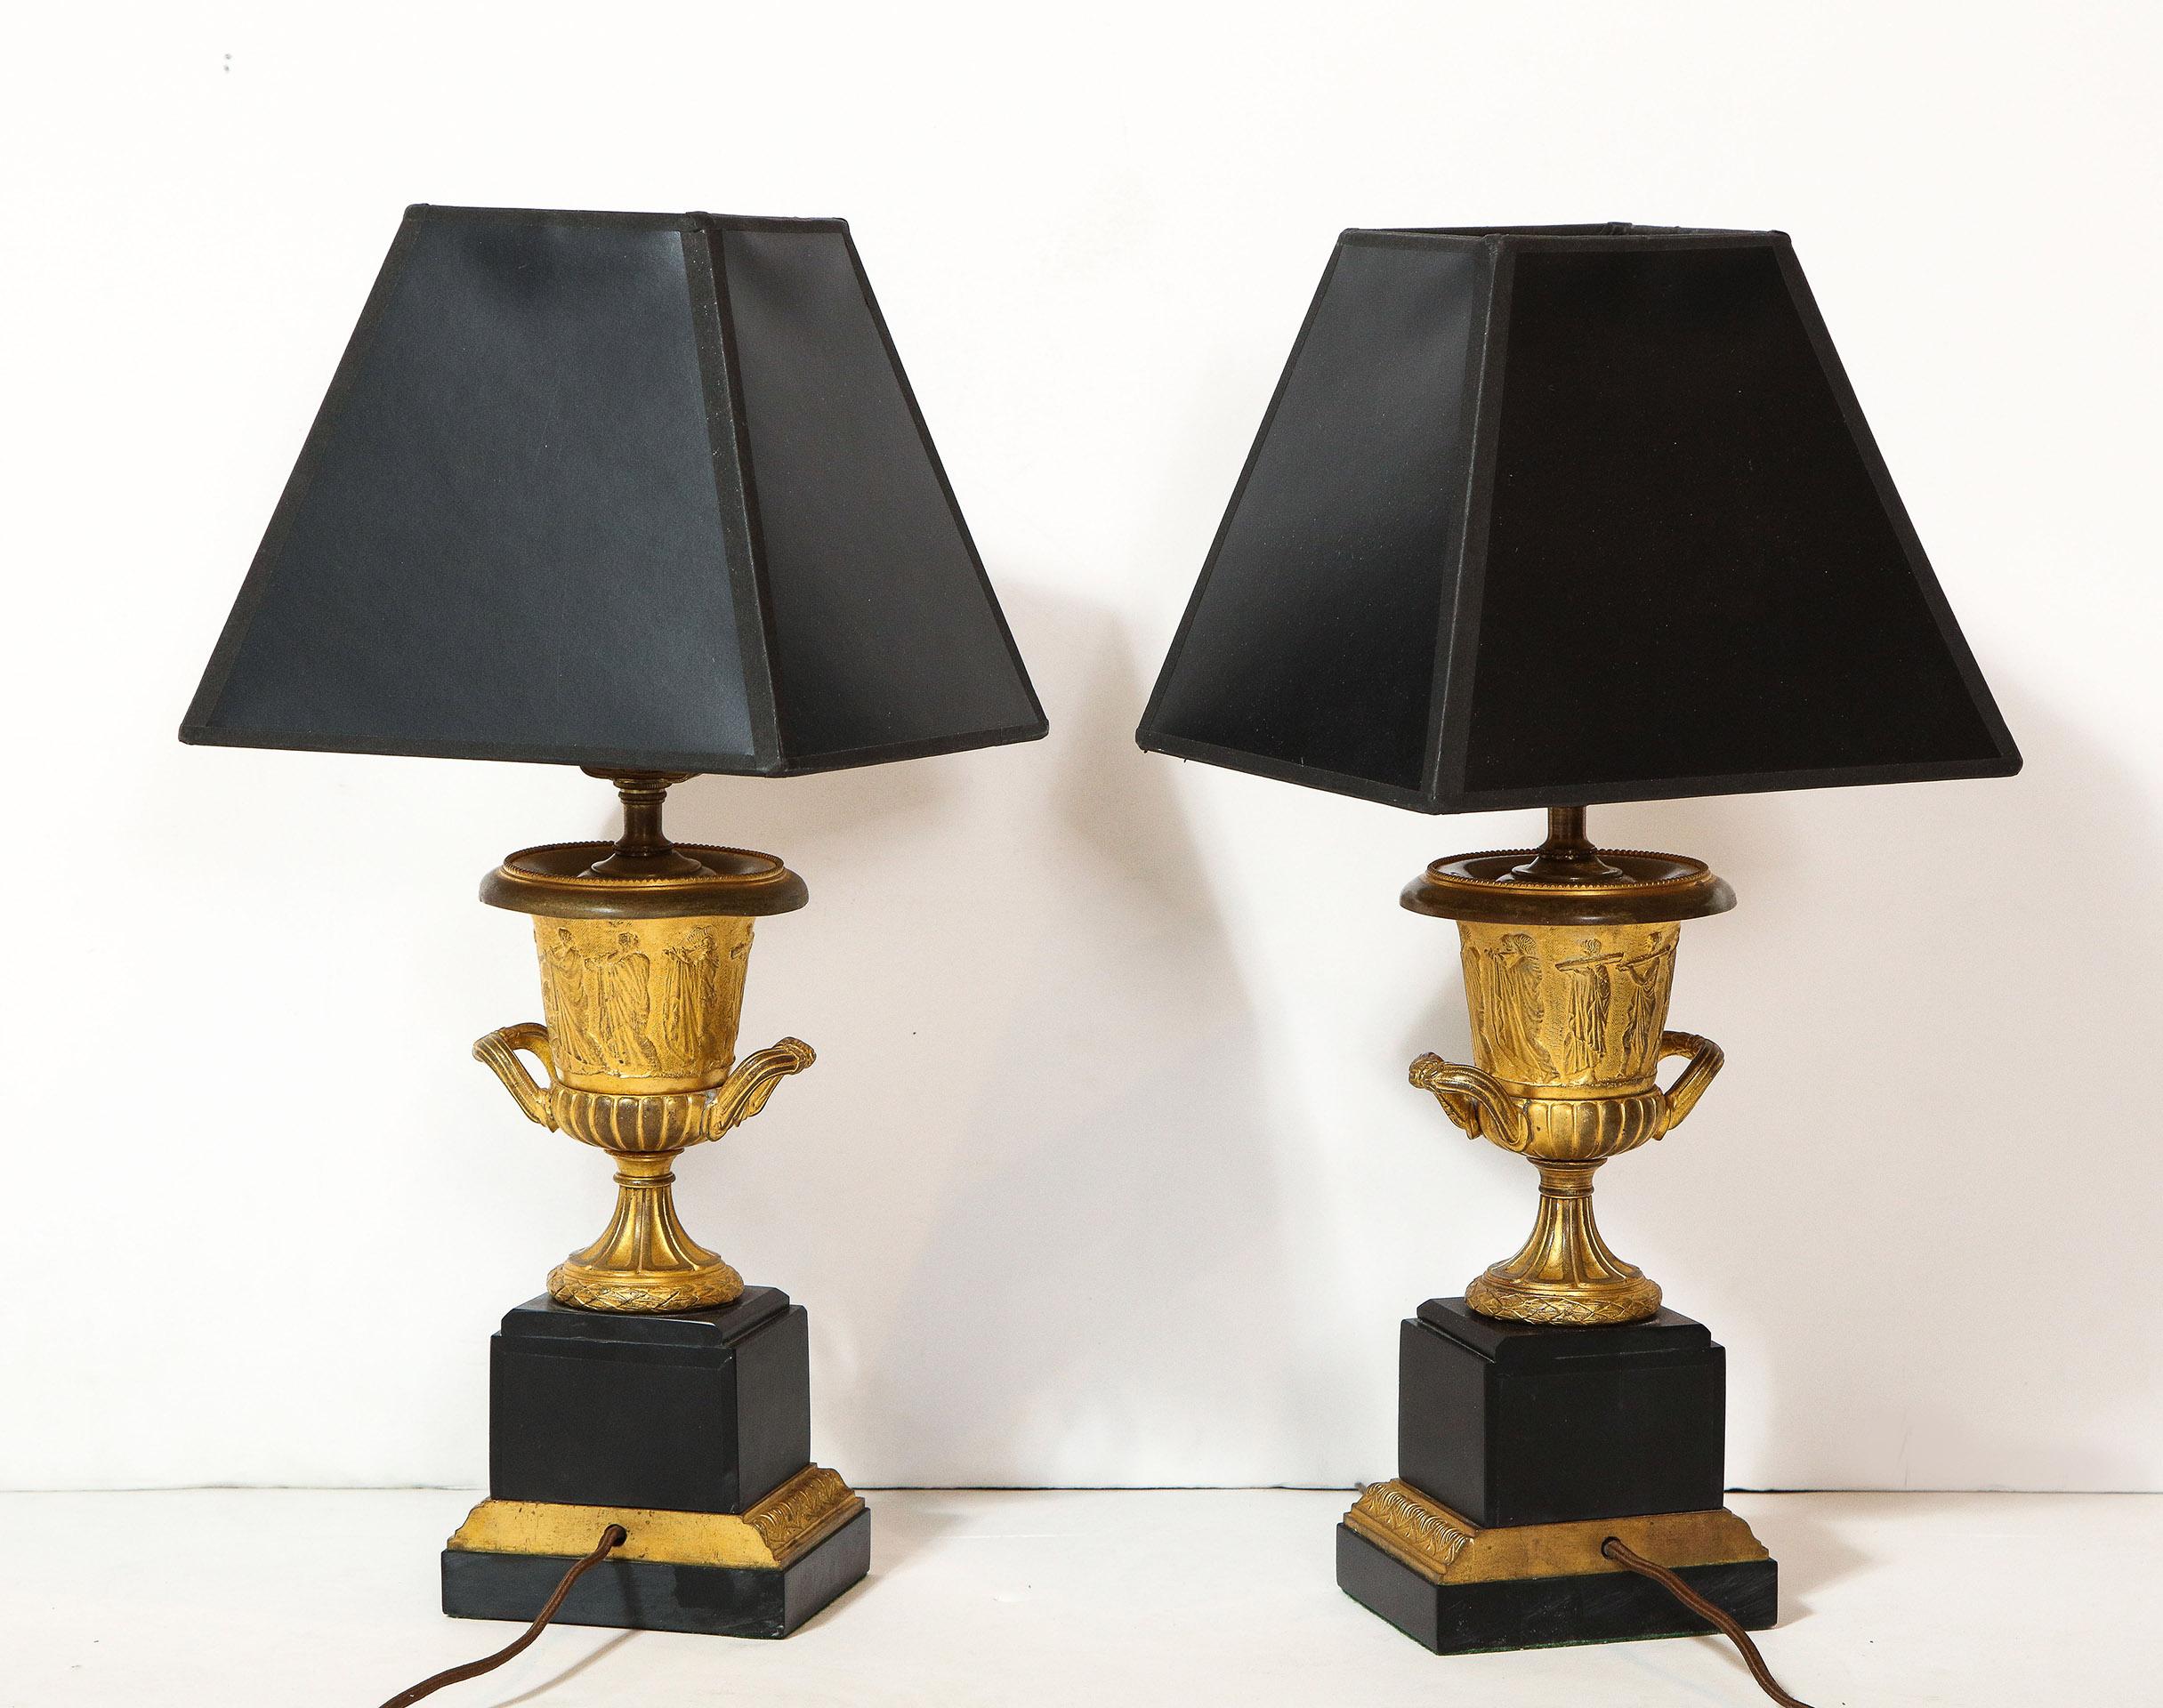 Pair of French Empire style bronze urns converted to lamps. The doré bronze urns with embossed neoclassic motifs on black marble bases.

The lamps have been recently wired.